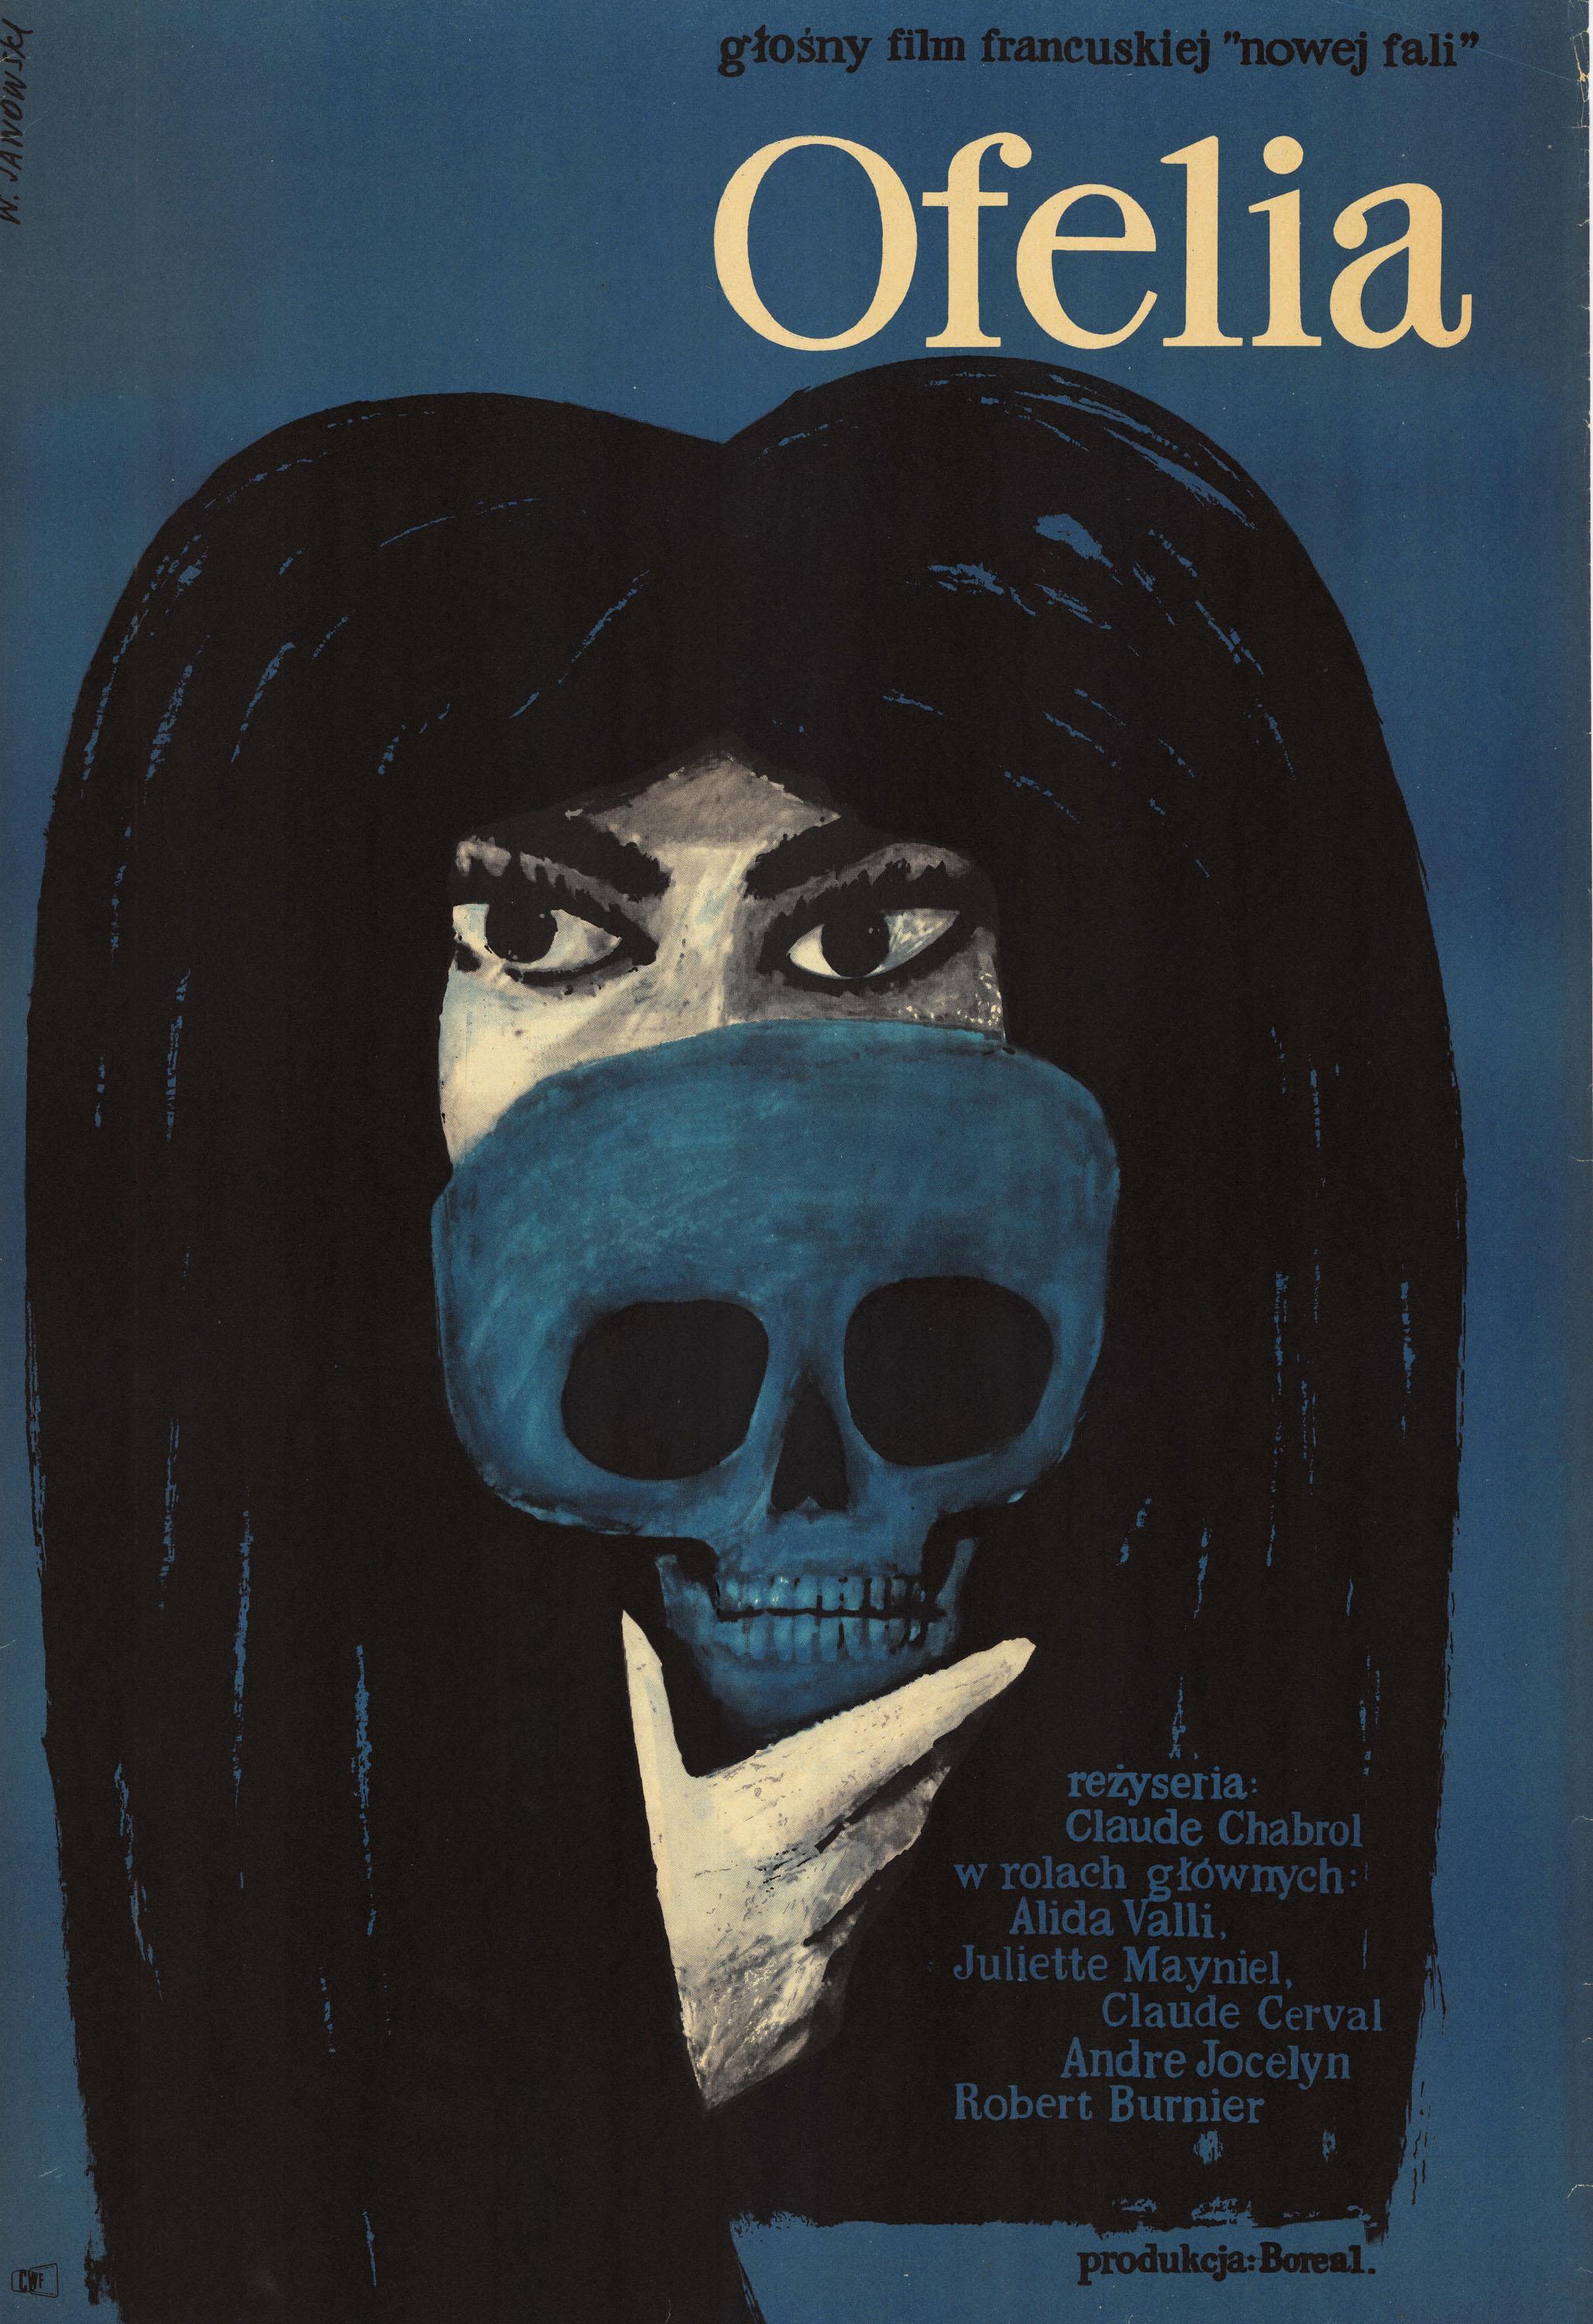 Other Ofelia Polish Movie Poster by Witold Janowski, 1964 For Sale